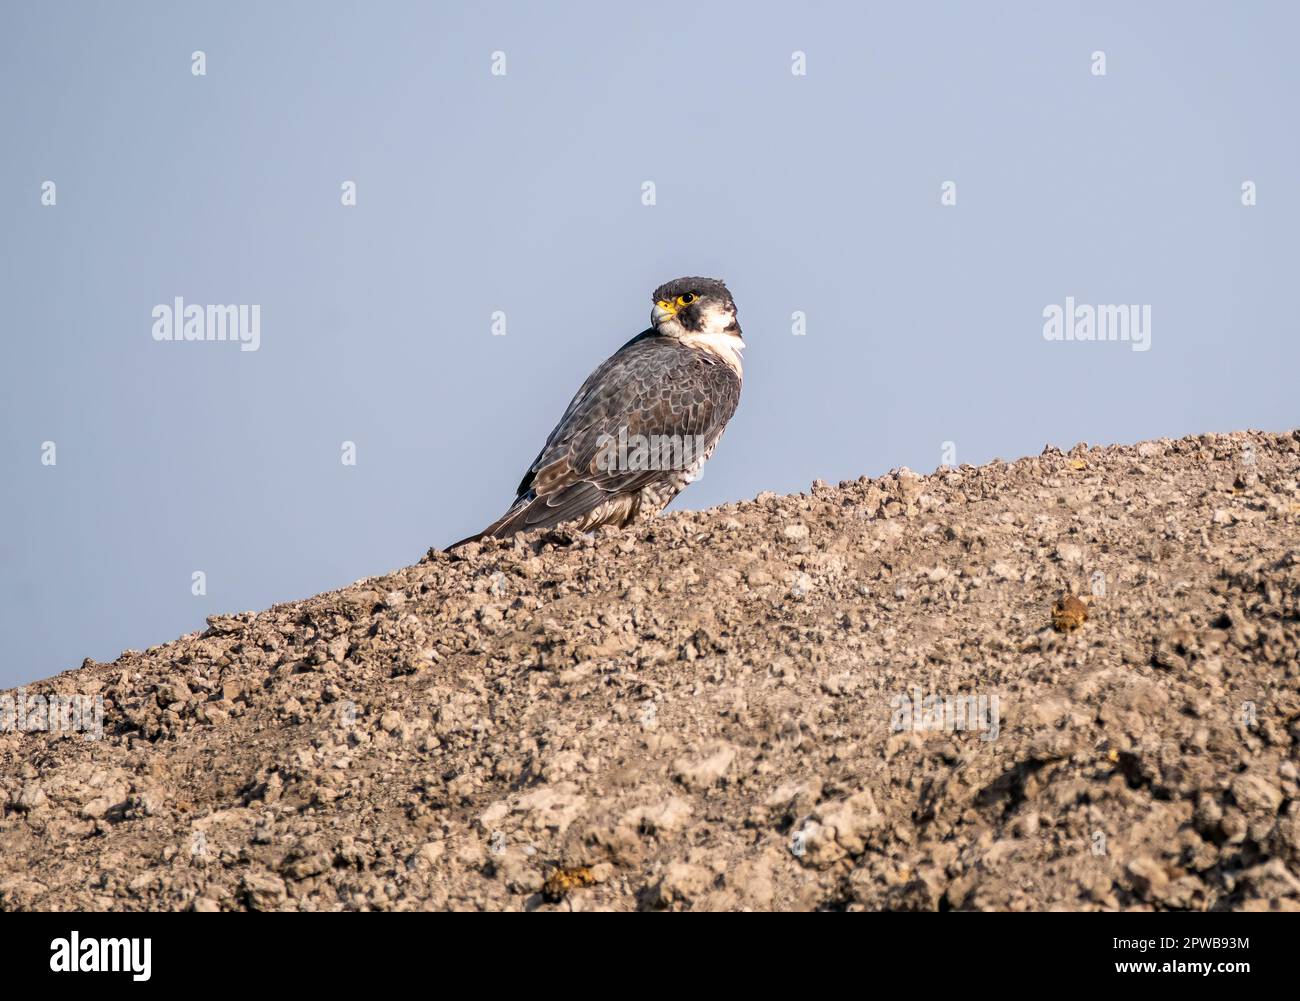 A peregrine falcon perched on a small stone inside Wildass sanctuary in little rann of kutch in Gujarat during a safari inside the sanctuary Stock Photo